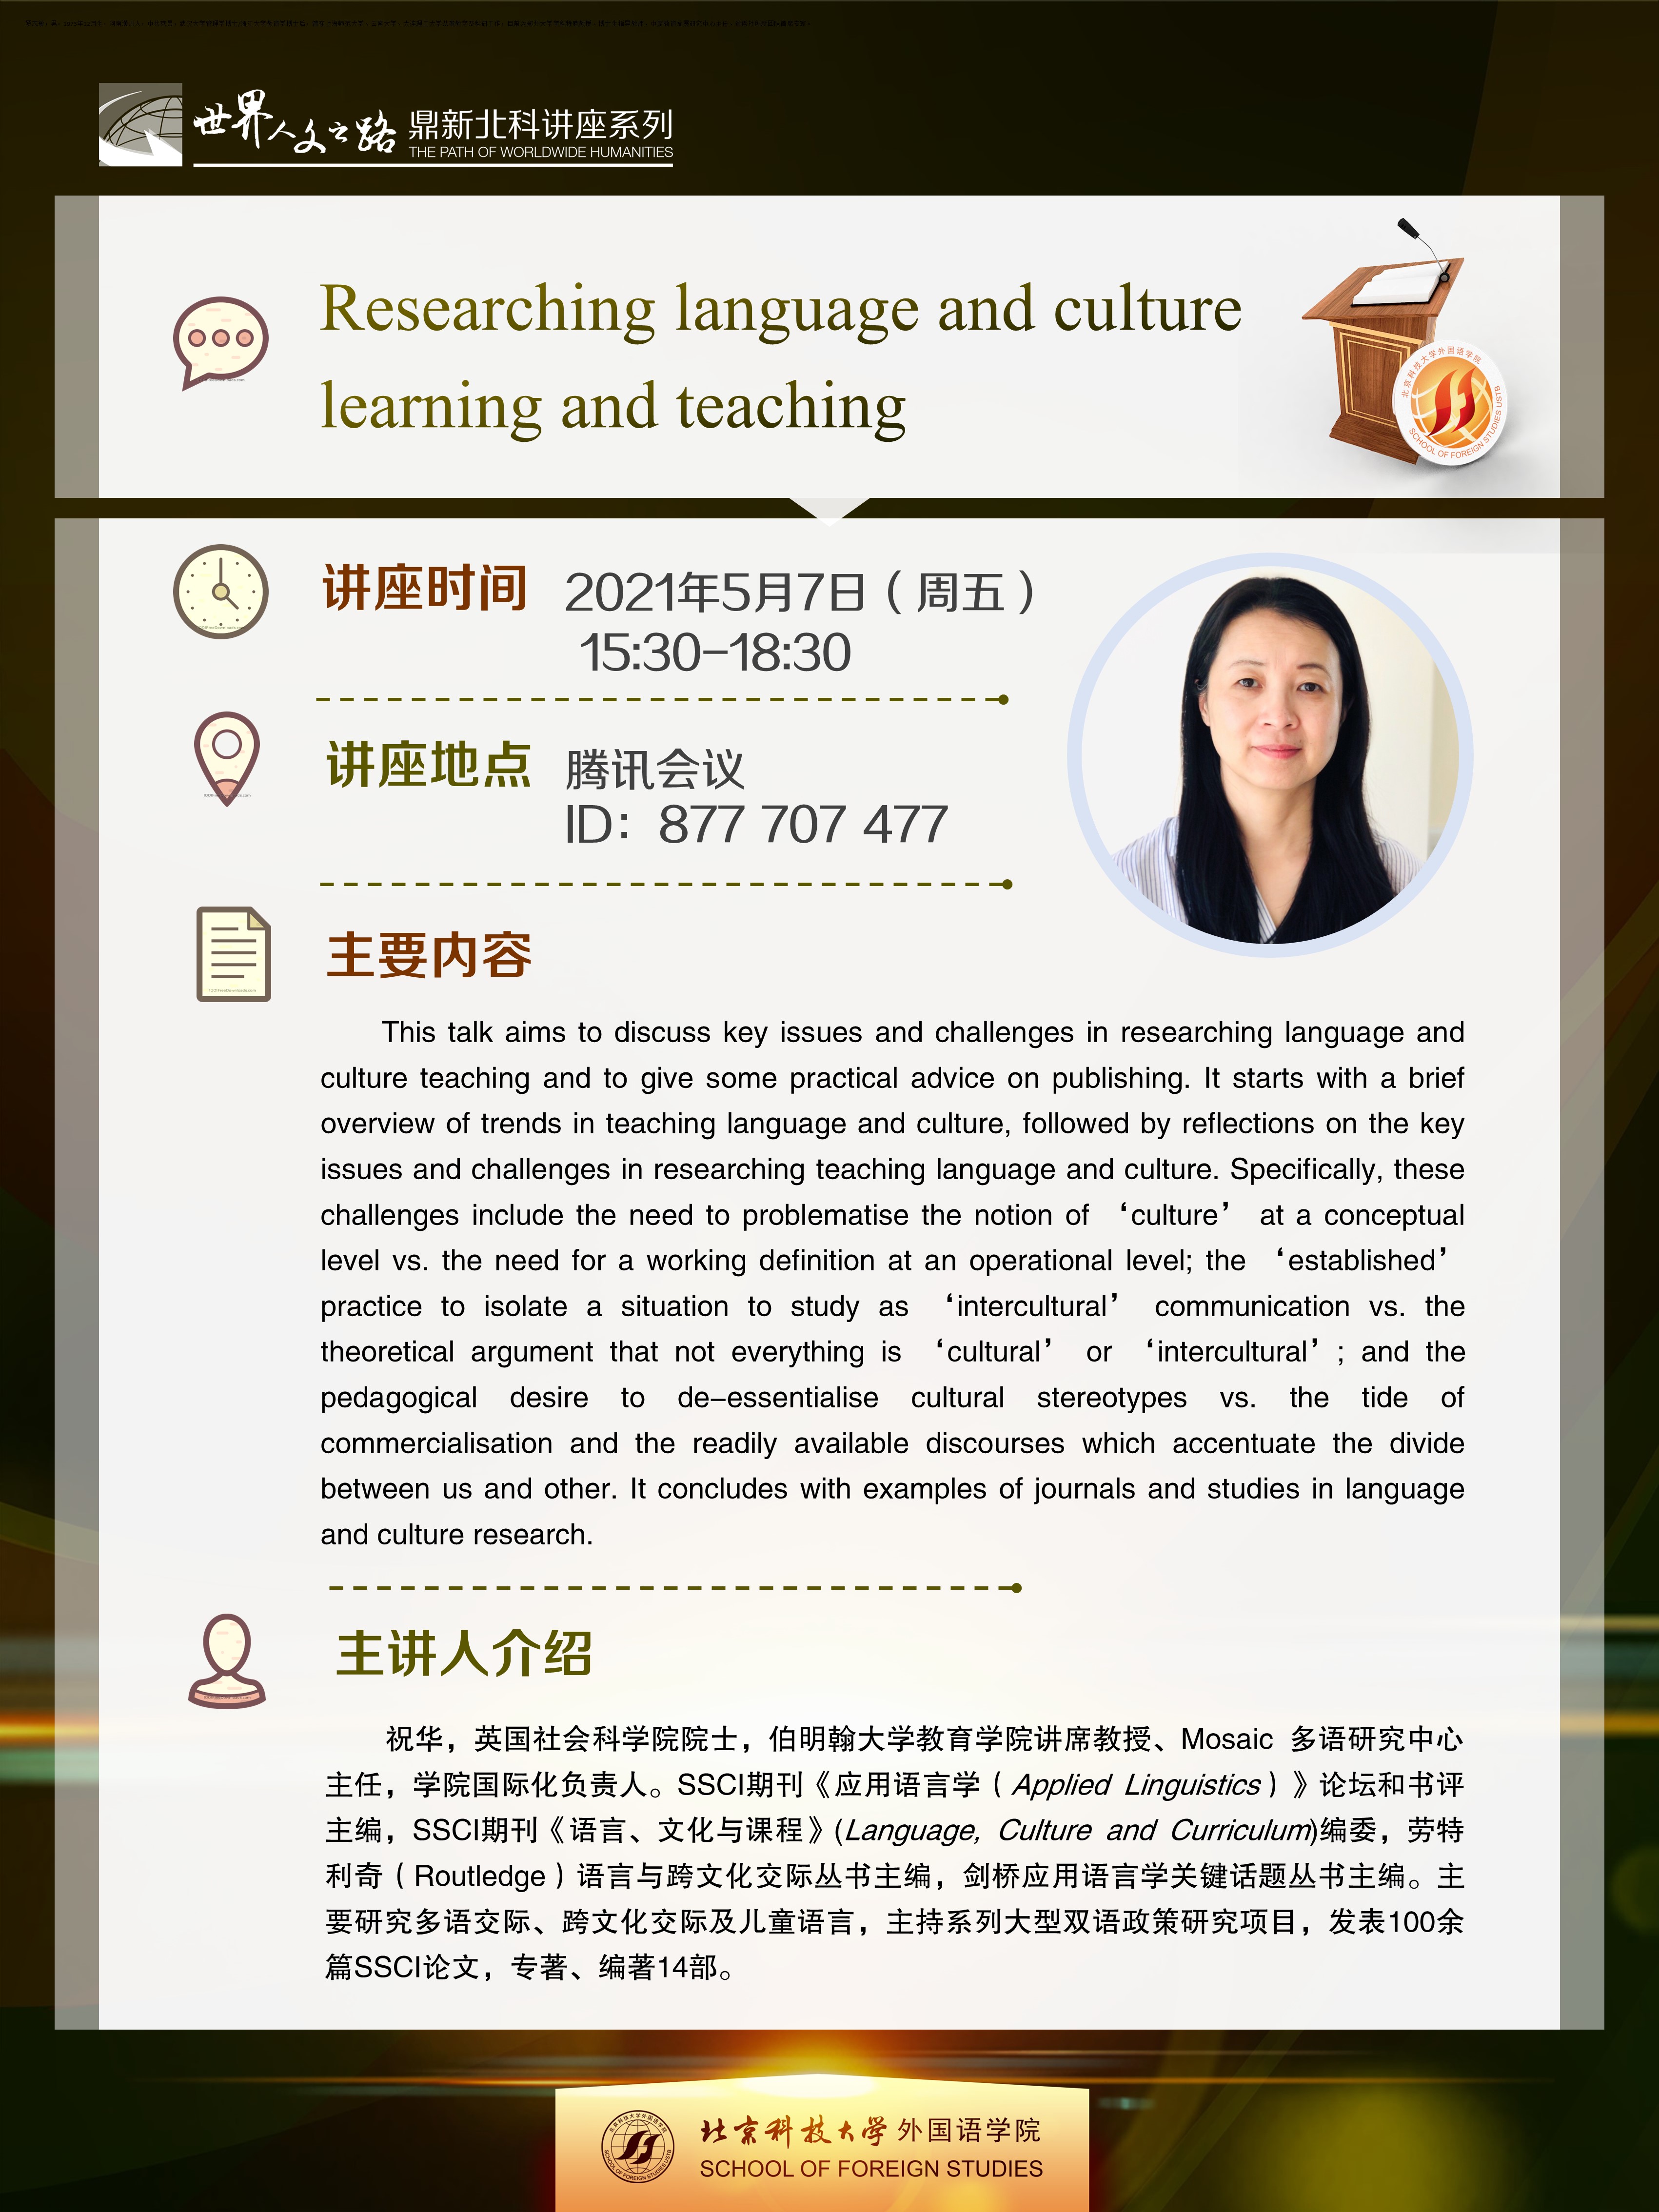 Researching language and culture learning and teaching.jpg